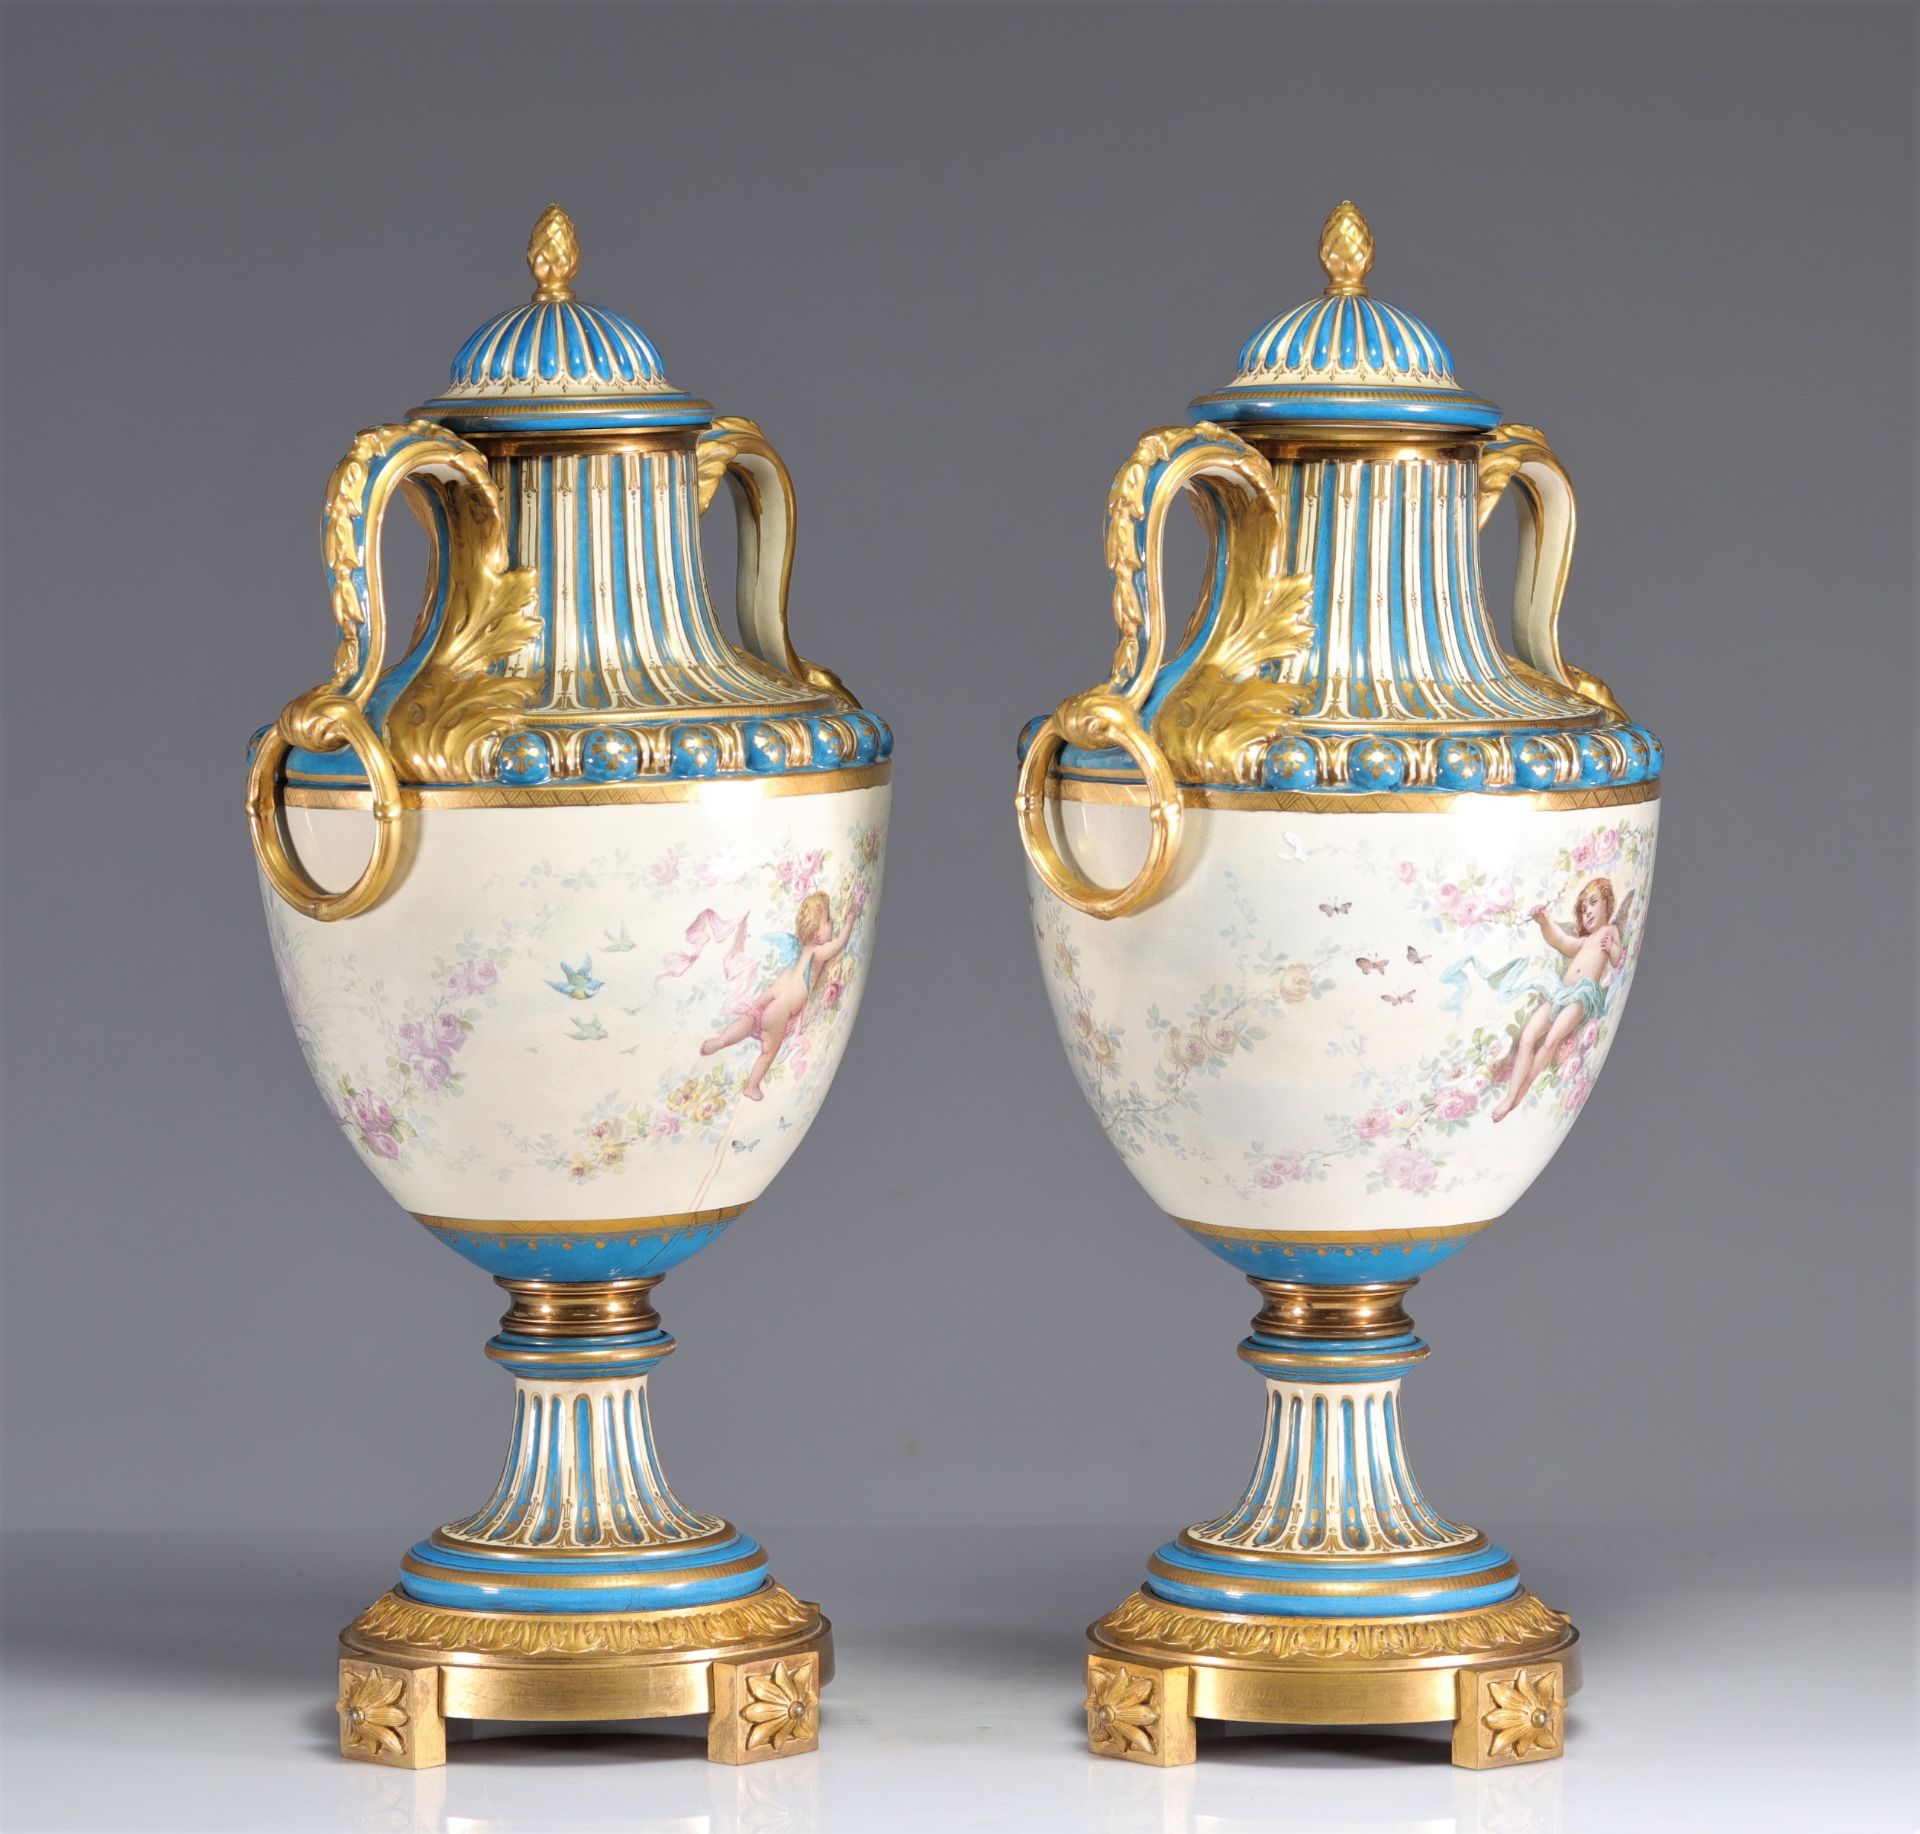 Sevres imposing pair of vases decorated with romantic scenes and cupids in gilded bronze - Image 3 of 8